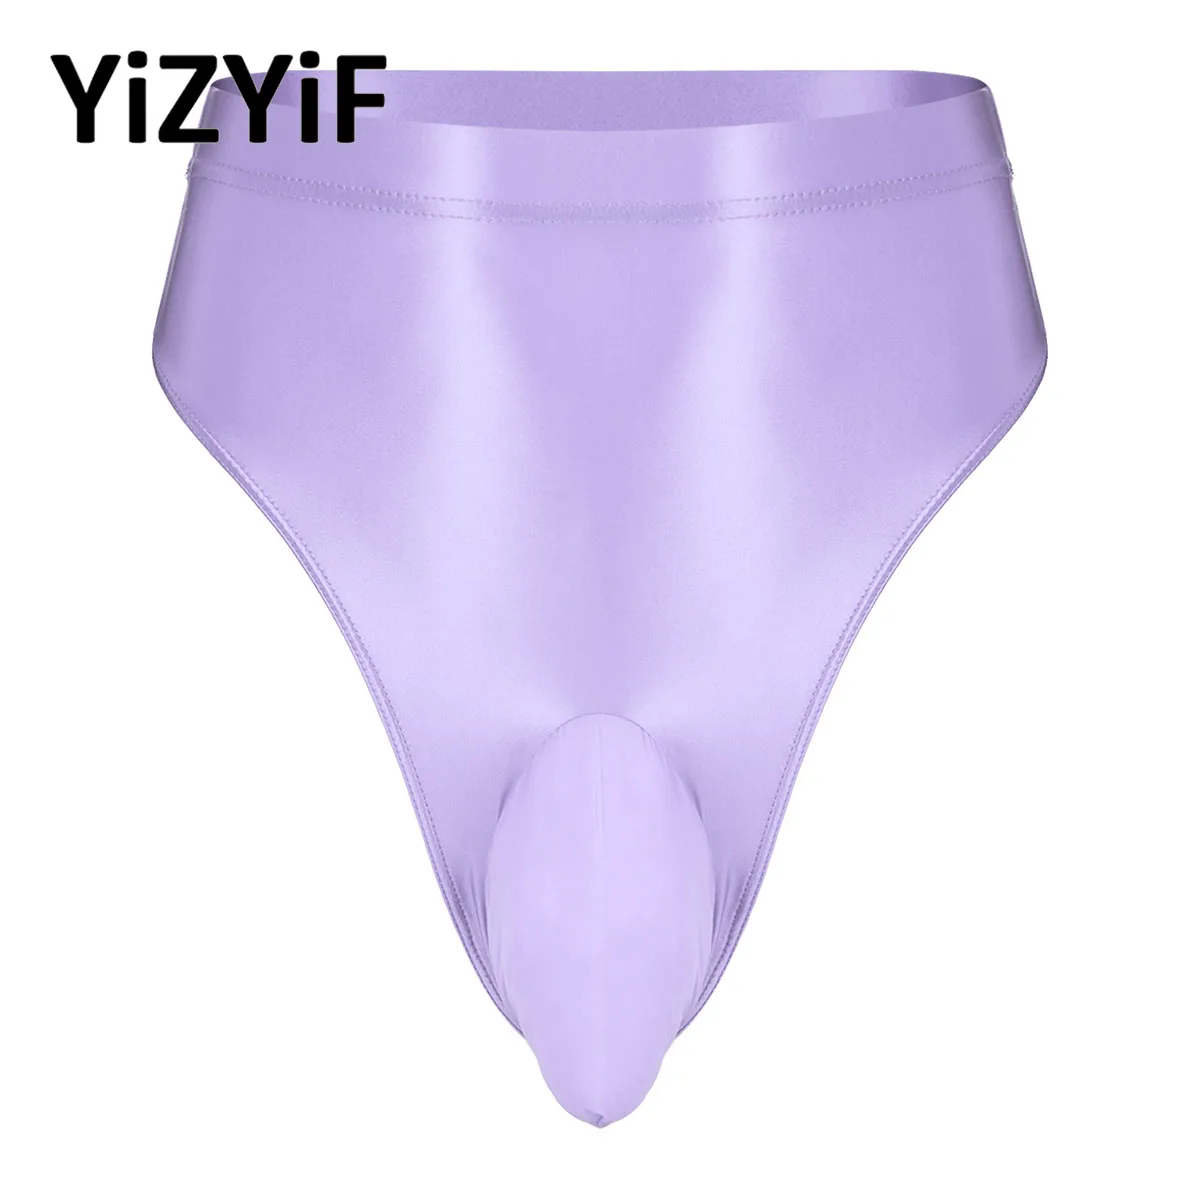 Panties For Men Crotch Seamless Glossy Silky High Elastic Plus Size Briefs  Underwear Transparent. 